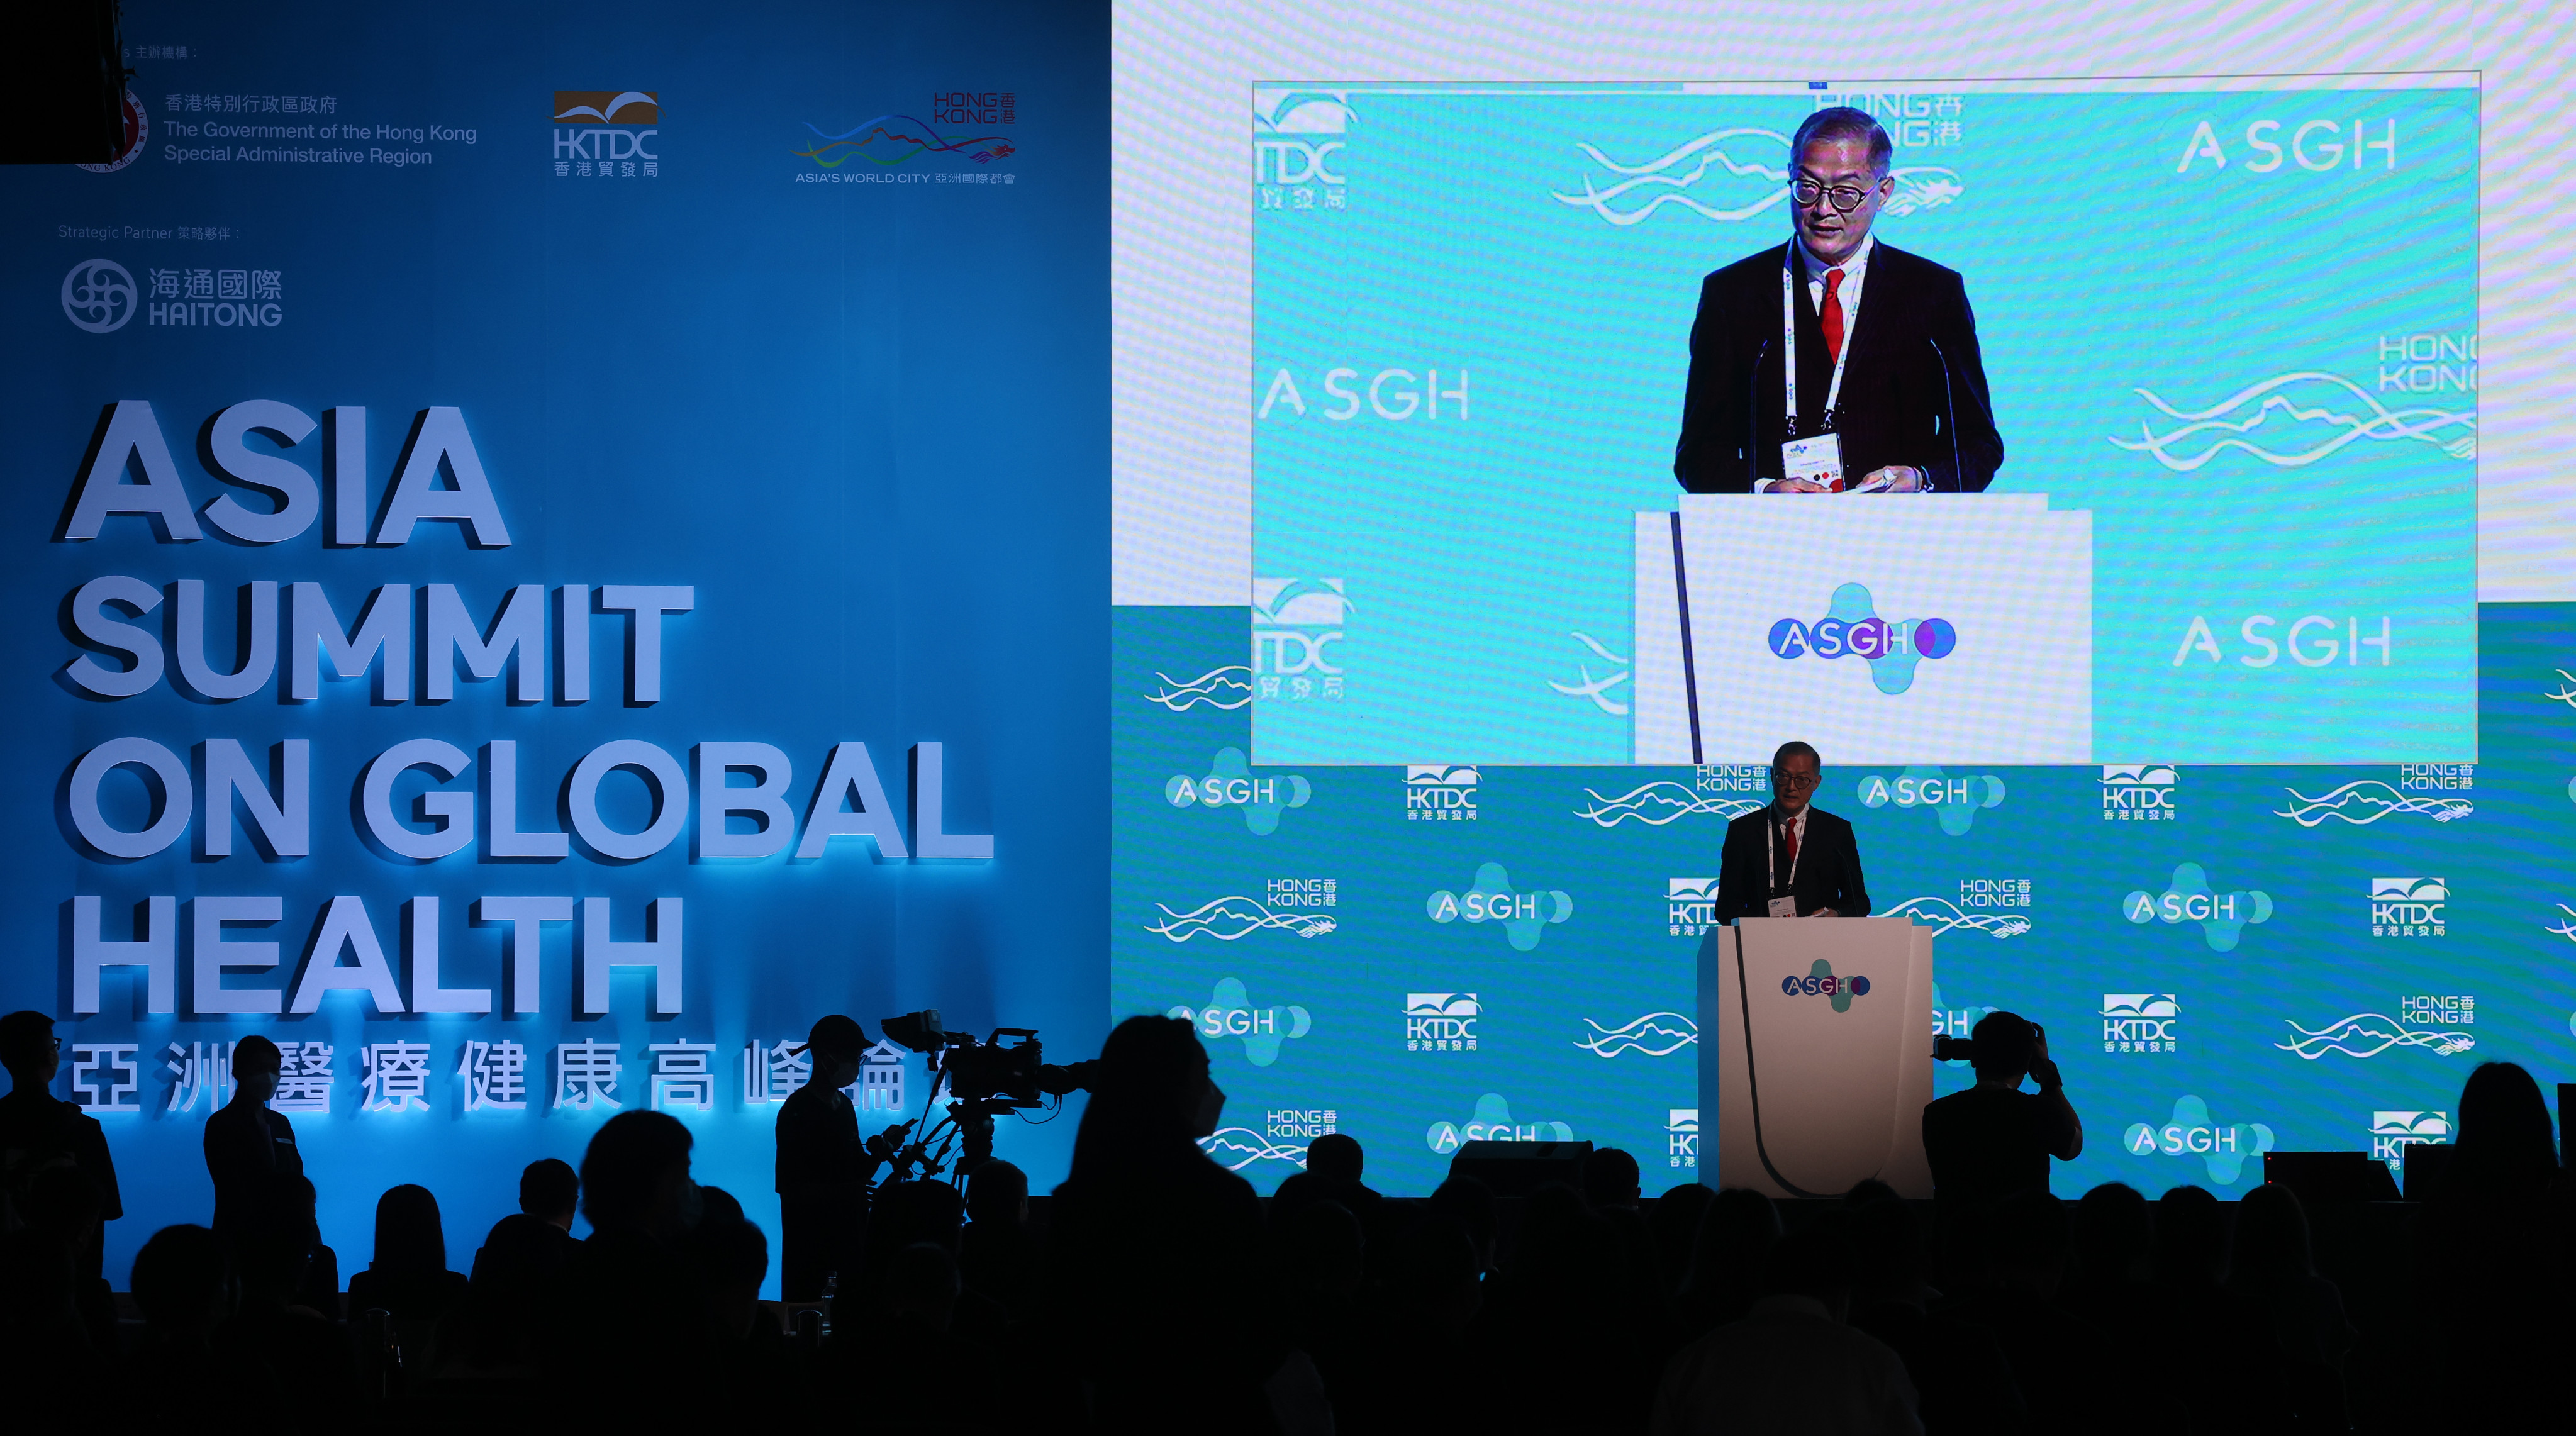 Health Secretary Lo Chung-mau speaks at the opening session of the Asia Summit on Global Health at the Hong Kong Convention and Exhibition Centre in Wan Chai on November 10, 2022. Photo: Jonathan Wong